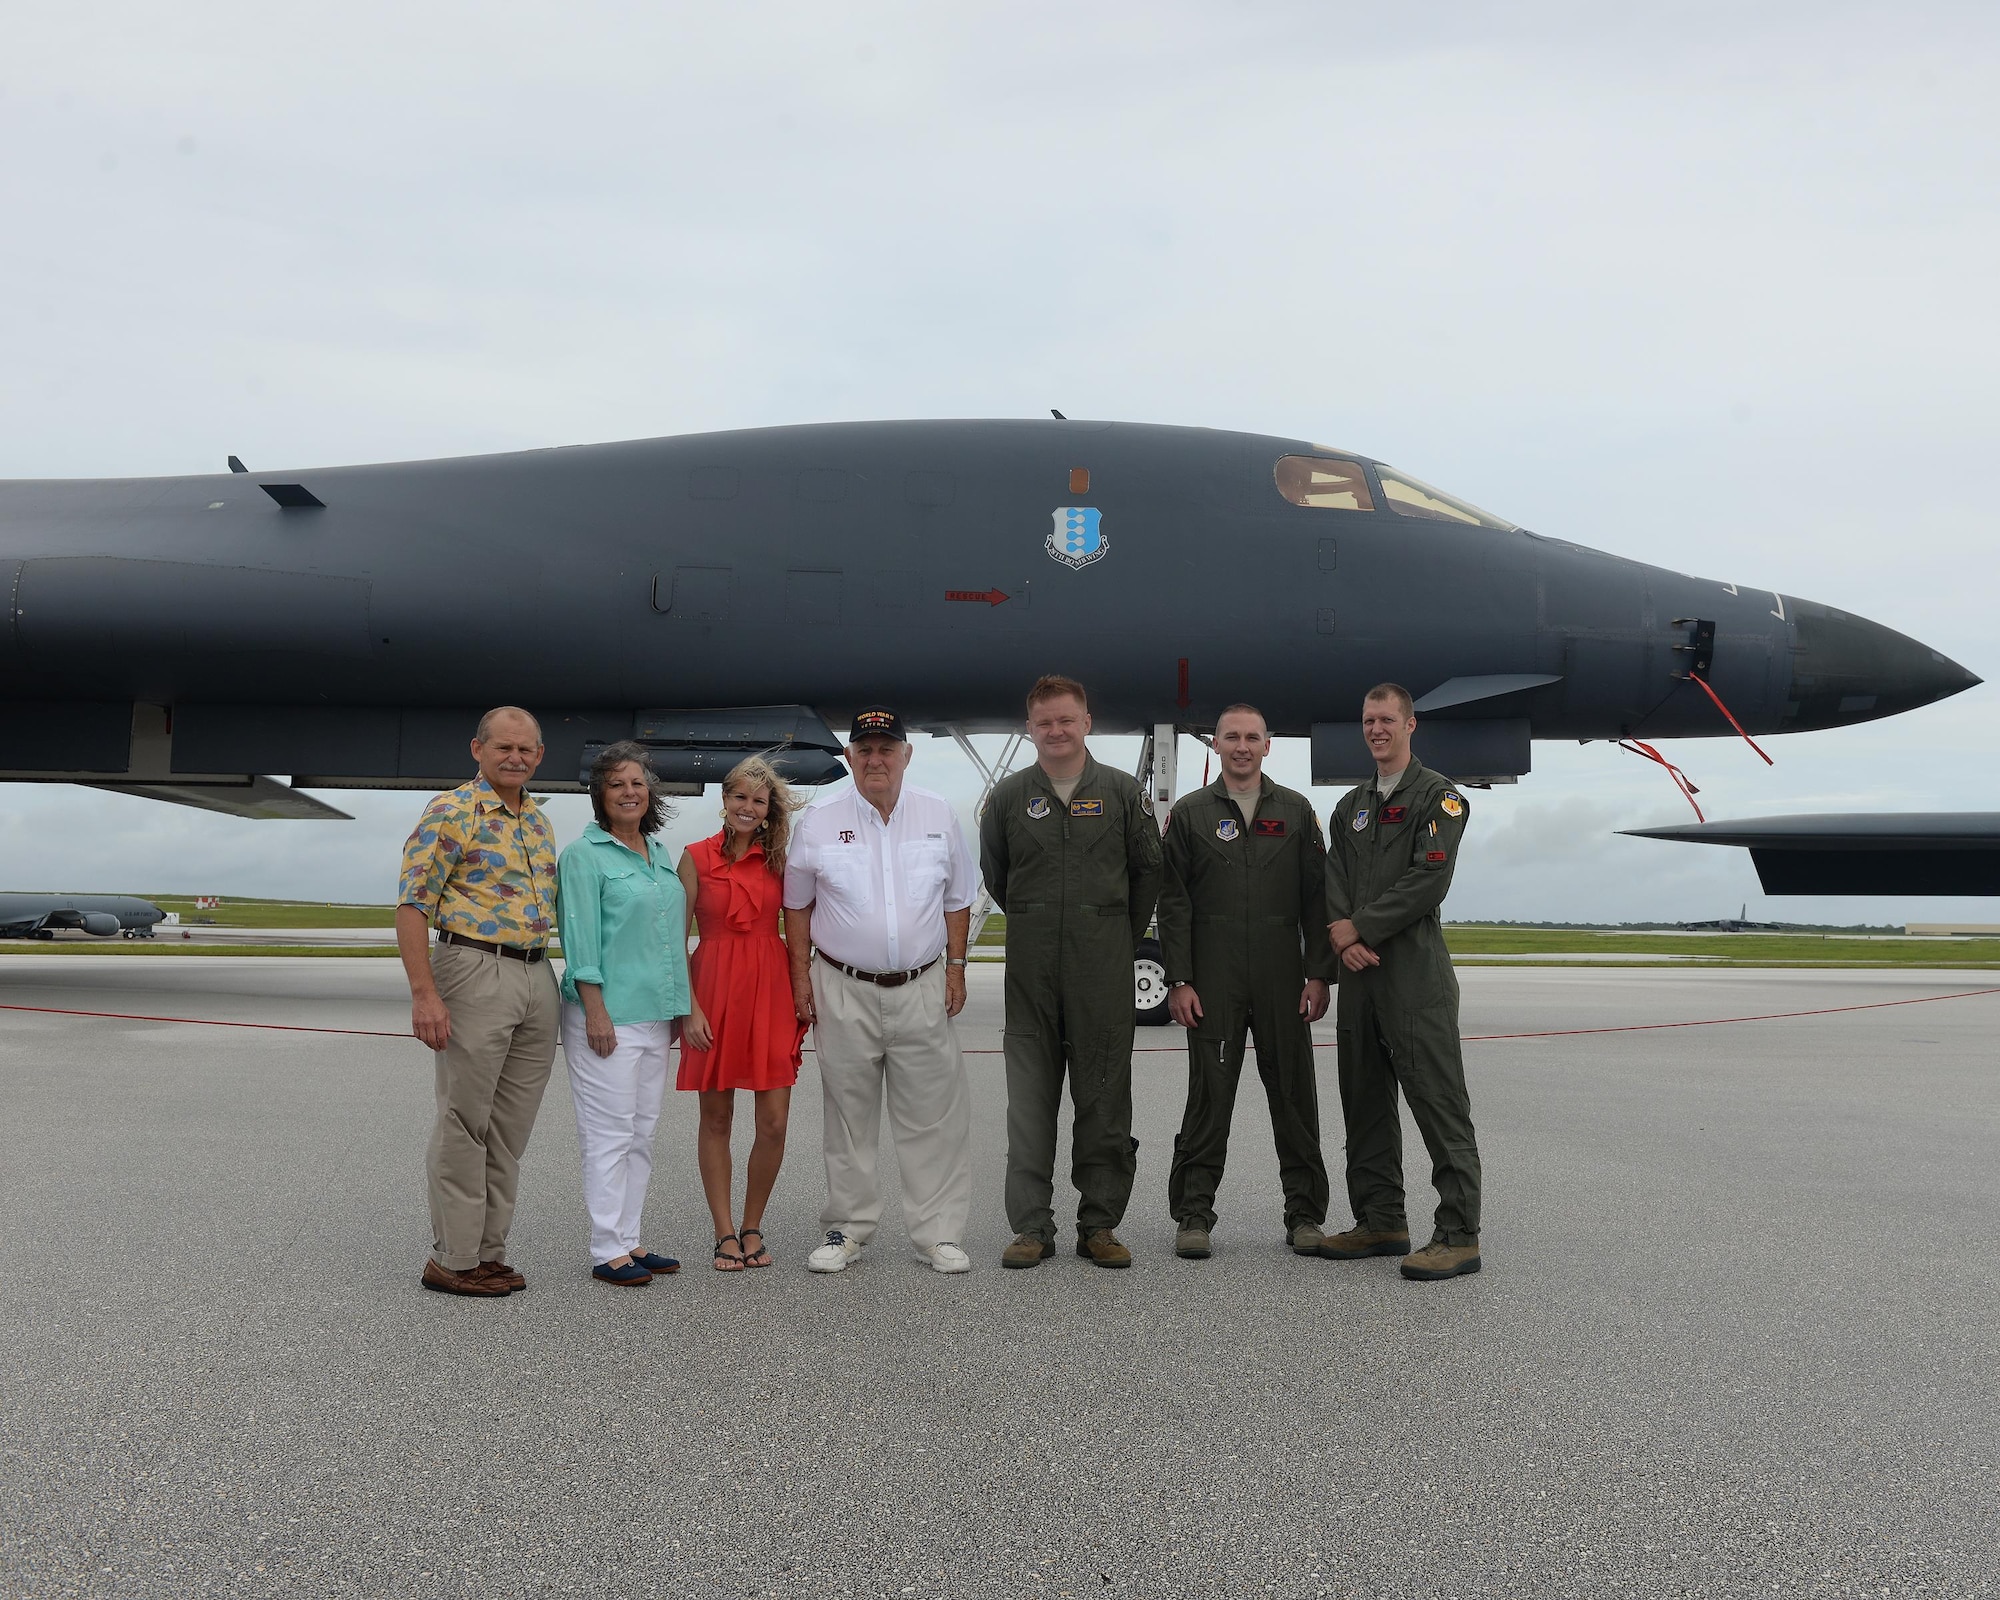 Rowland Ball, a World War II veteran, family members and Team Andersen Airmen pose for a photo in front of a B-1B Lancer during a visit to Andersen Air Force Base, Guam, Aug. 16, 2016. Ball served in the United States Army Air Corps as a B-29 Superfortress navigator during the tail end of World War II, where he flew 27 missions out of Guam. (U.S. Air Force photo by Staff Sgt. Benjamin Gonsier)